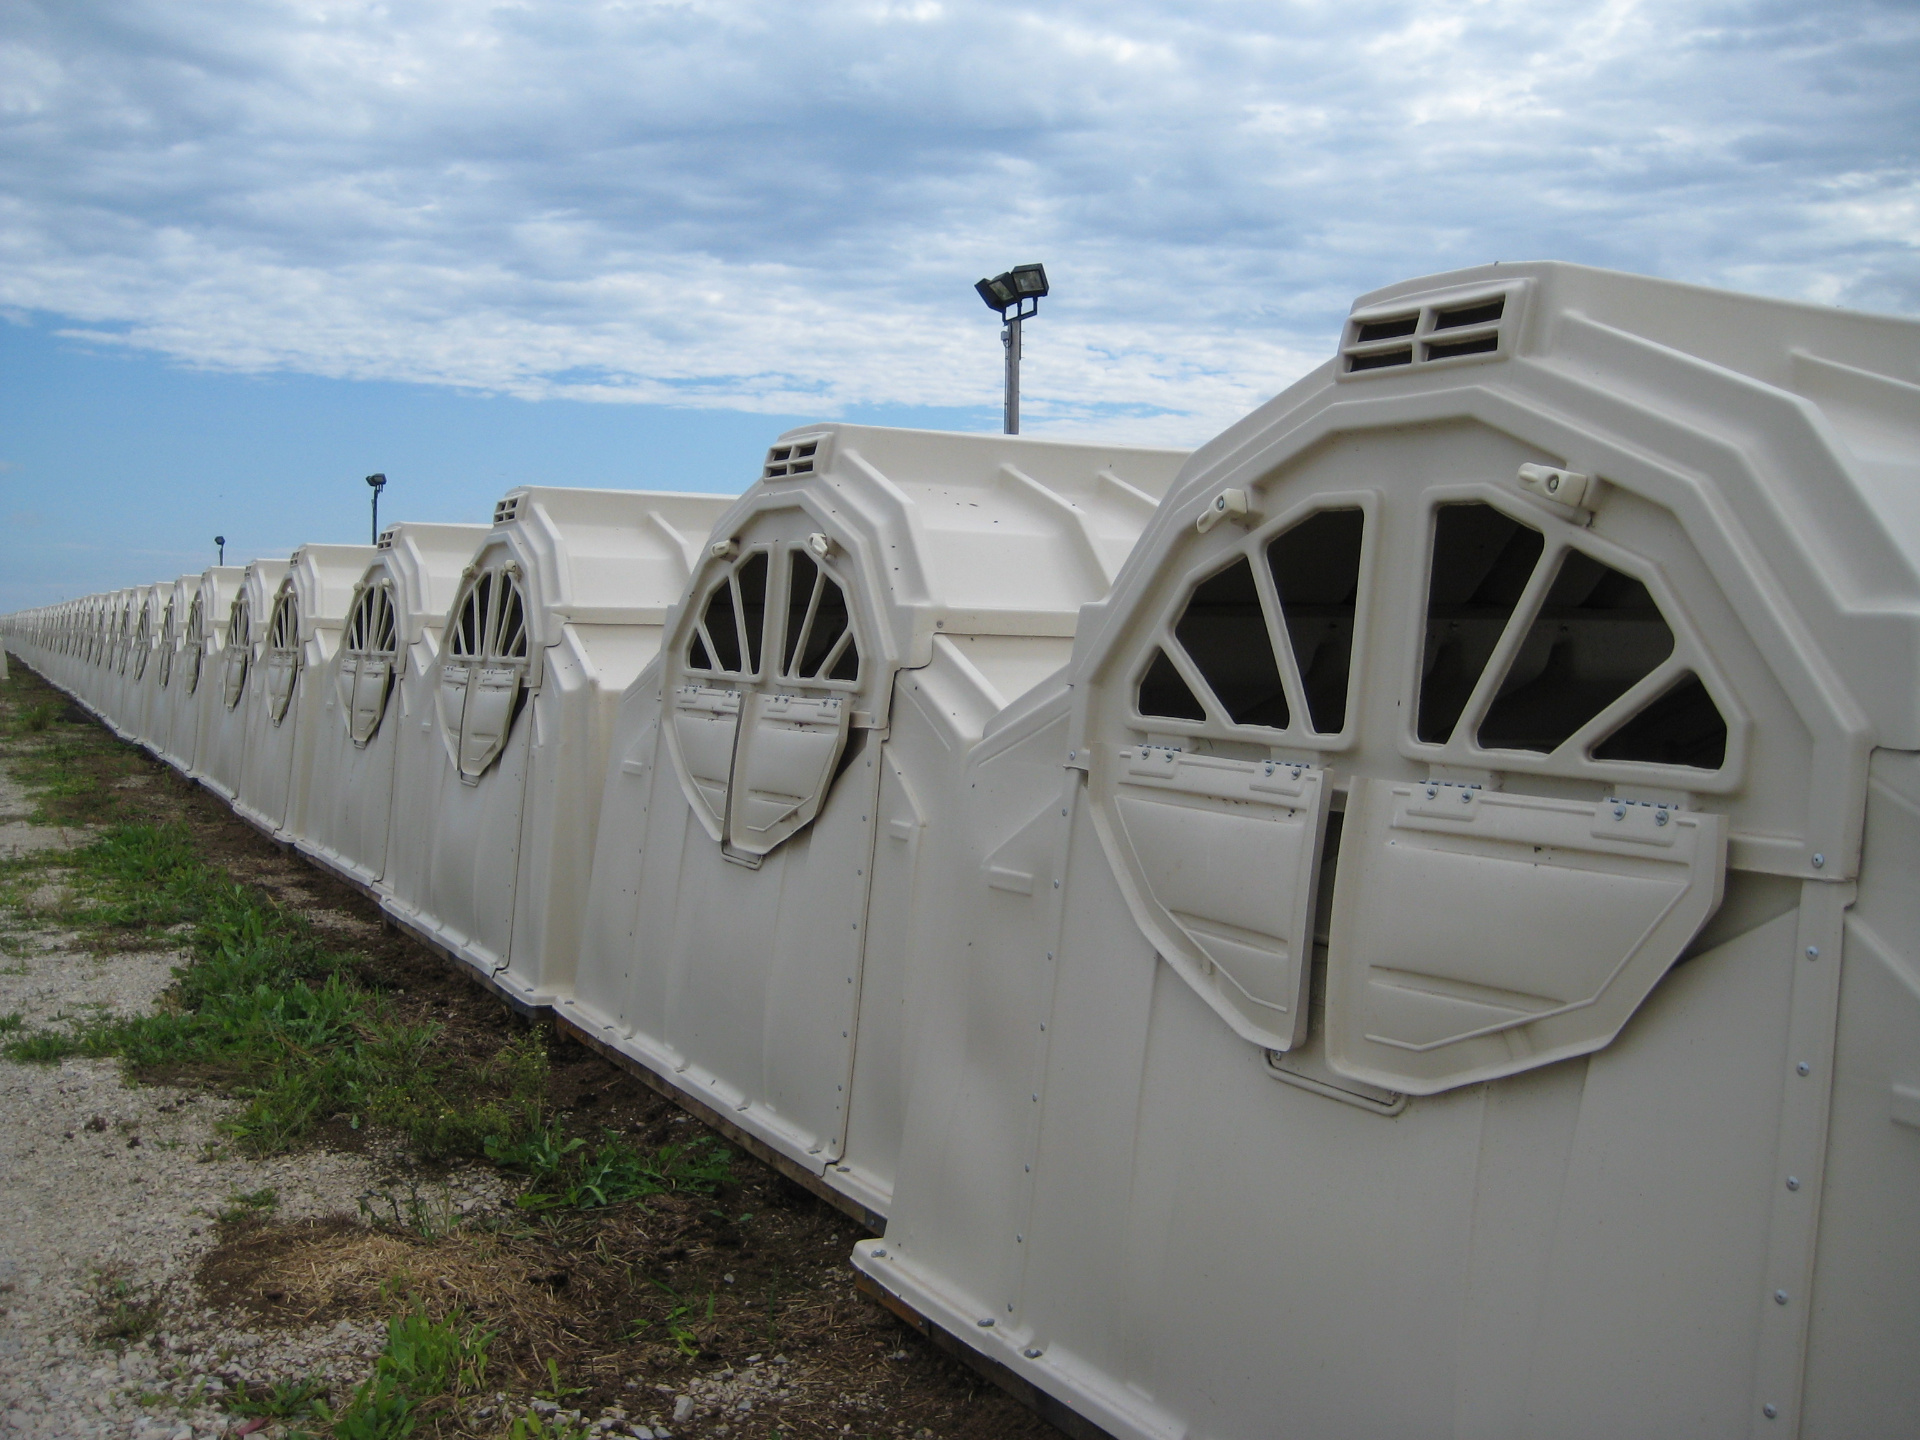 Long row of MultiMax hutches from the rear